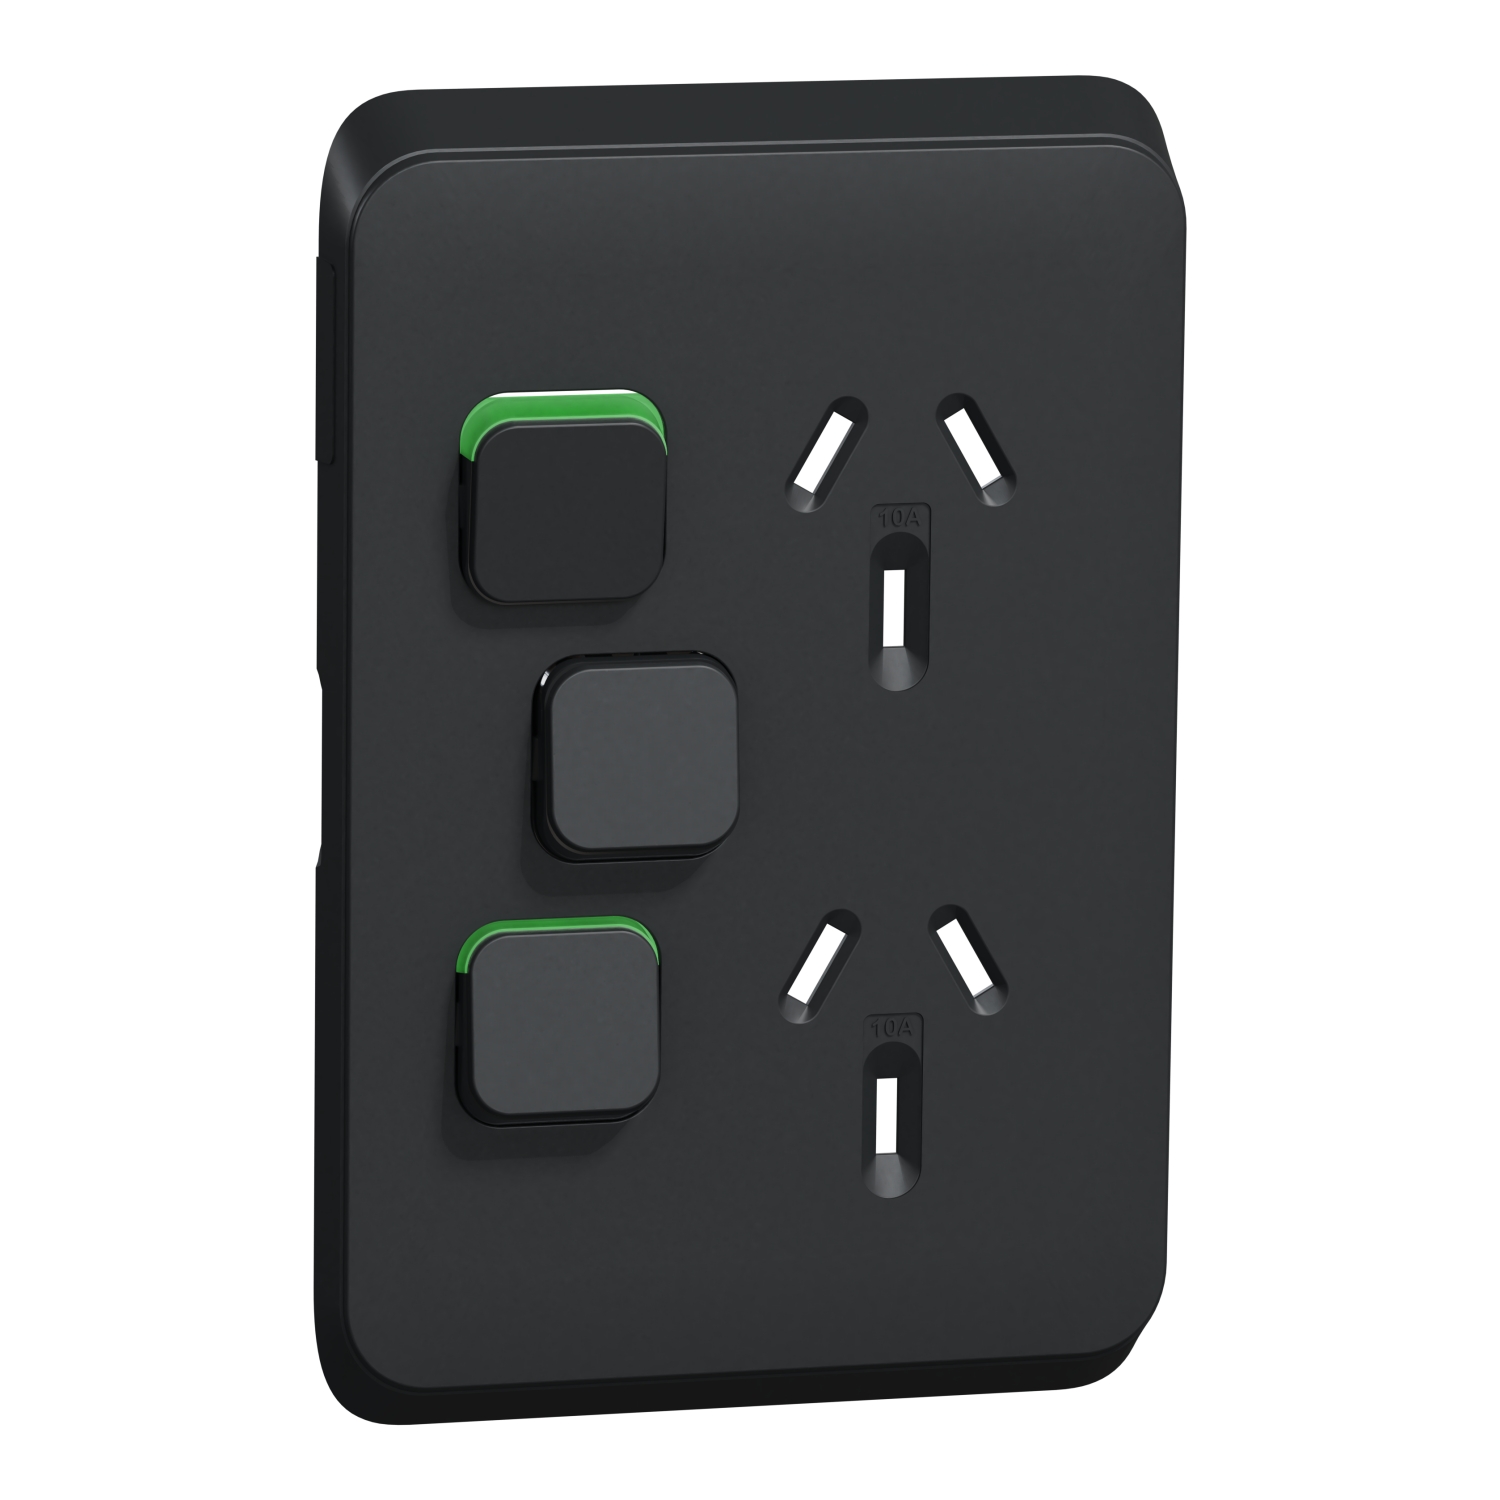 PDL Iconic - Cover Plate Double Switched Socket + Switch 10A Vertical - Solid Black